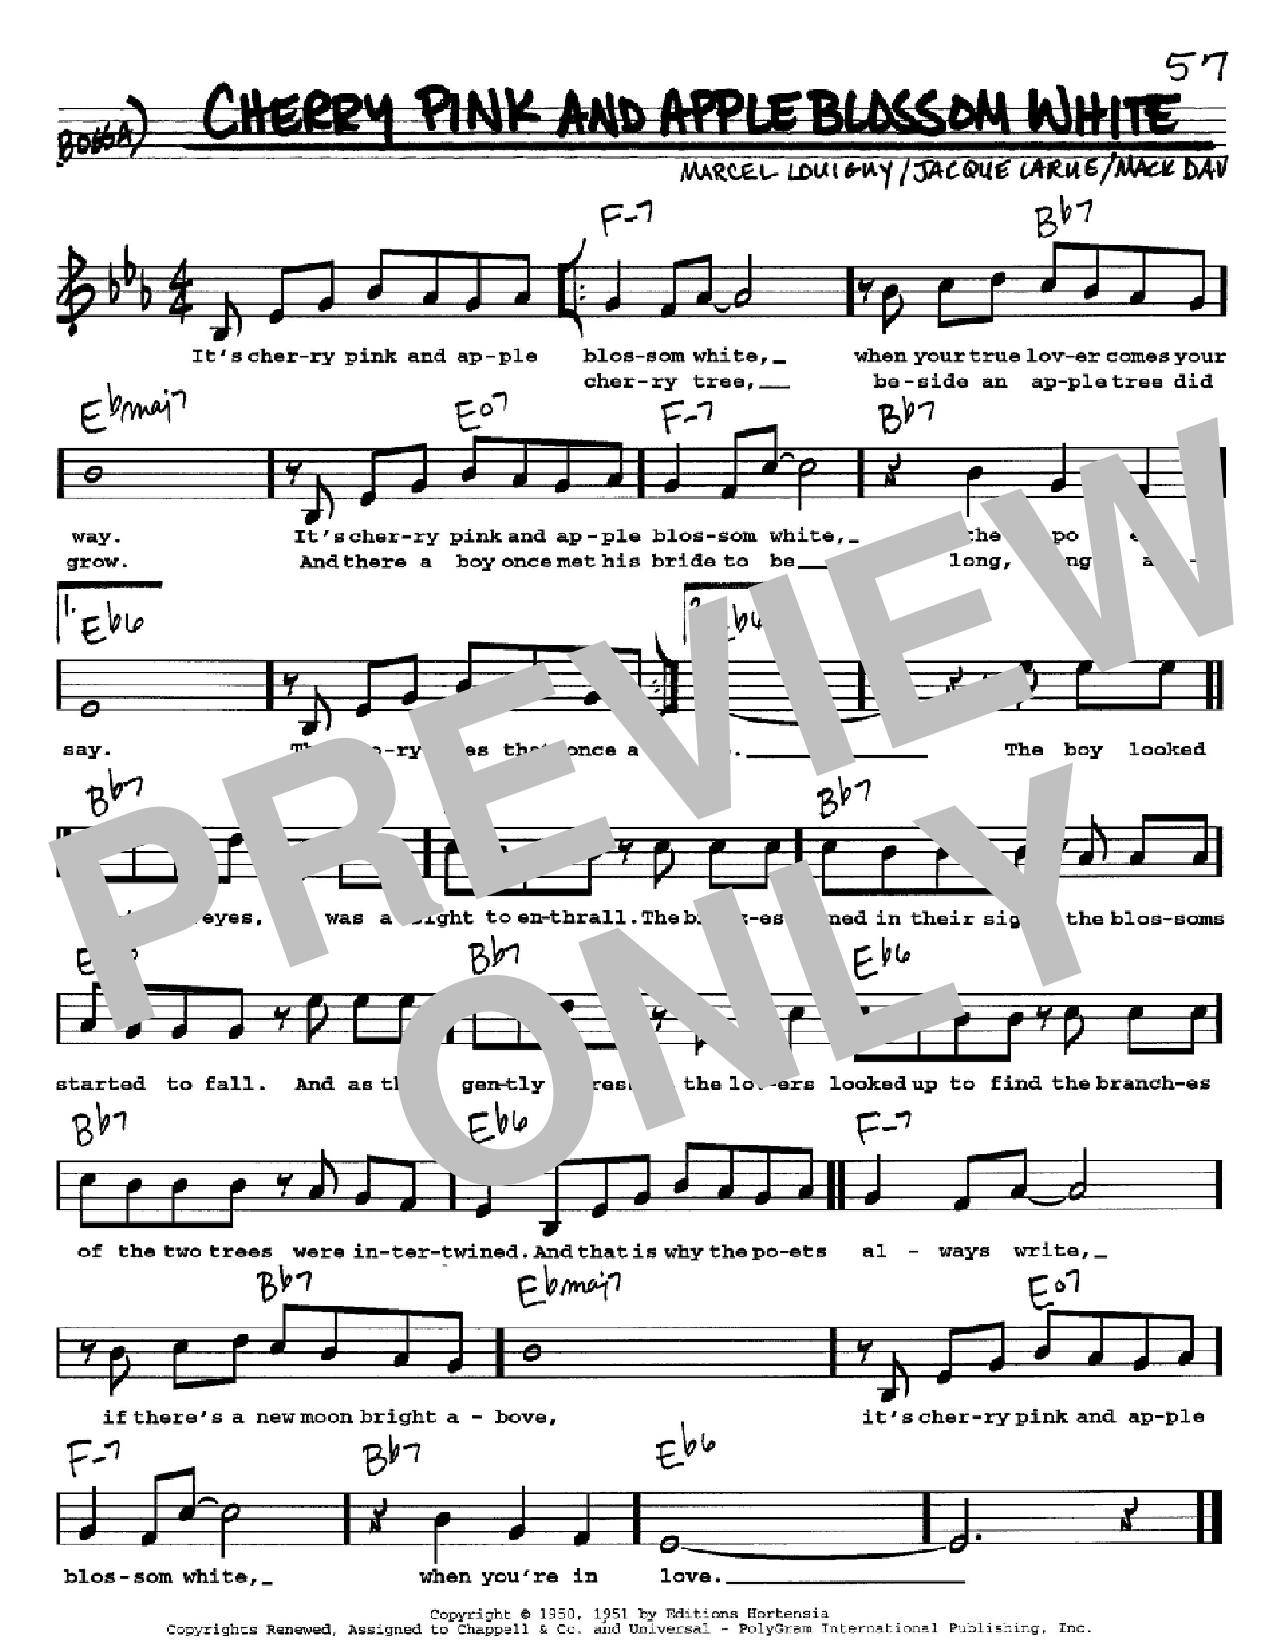 Download Mack David Cherry Pink And Apple Blossom White Sheet Music